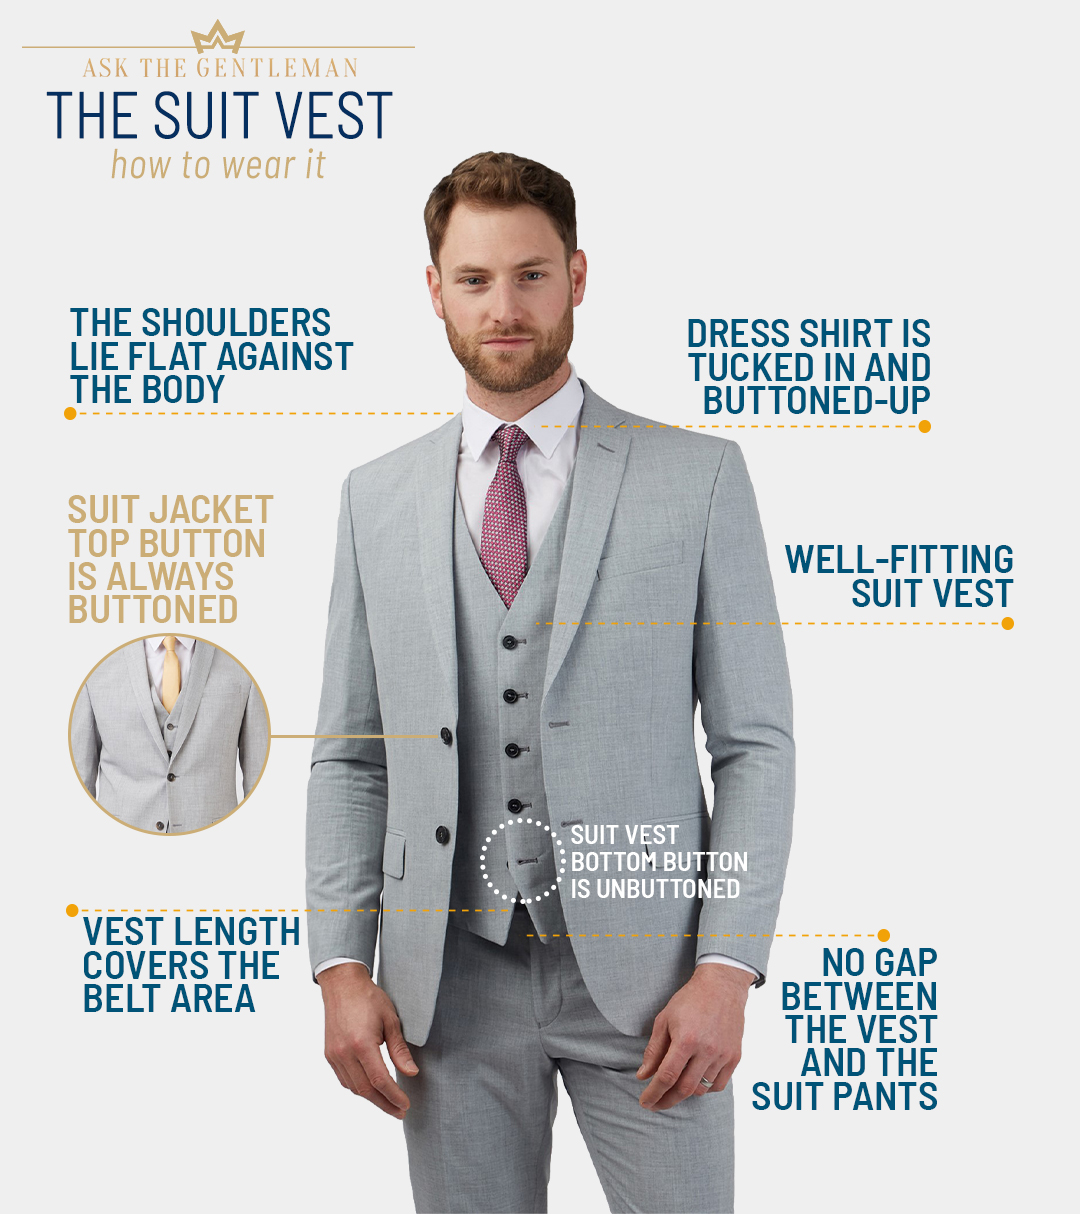 How to wear a suit vest with a suit and shirt